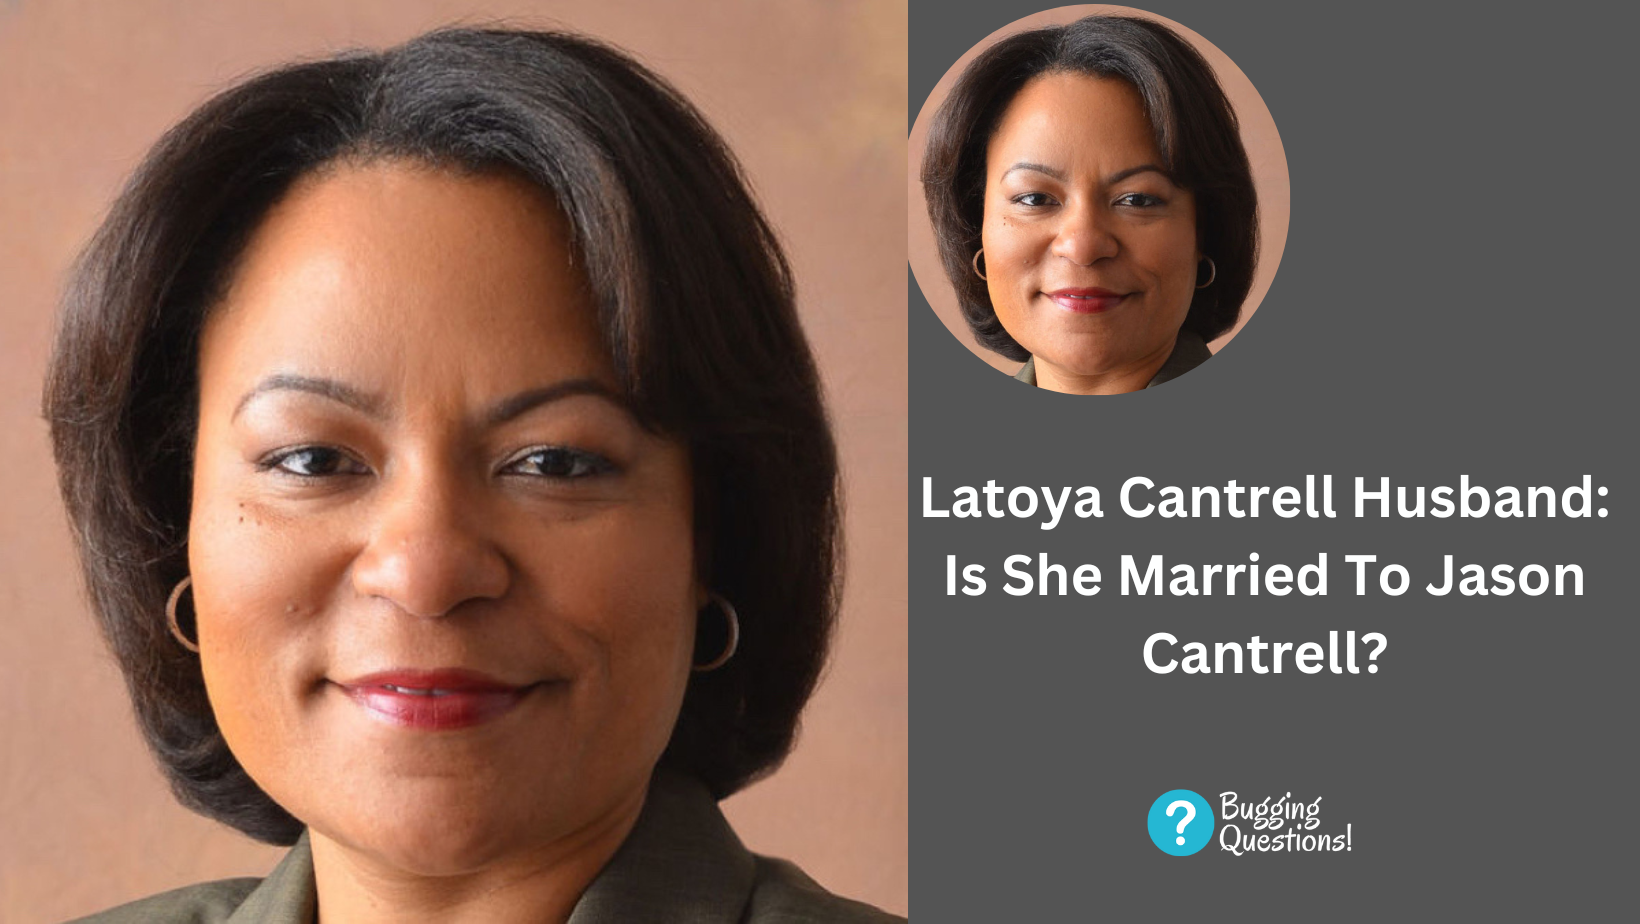 Latoya Cantrell Husband: Is She Married To Jason Cantrell?